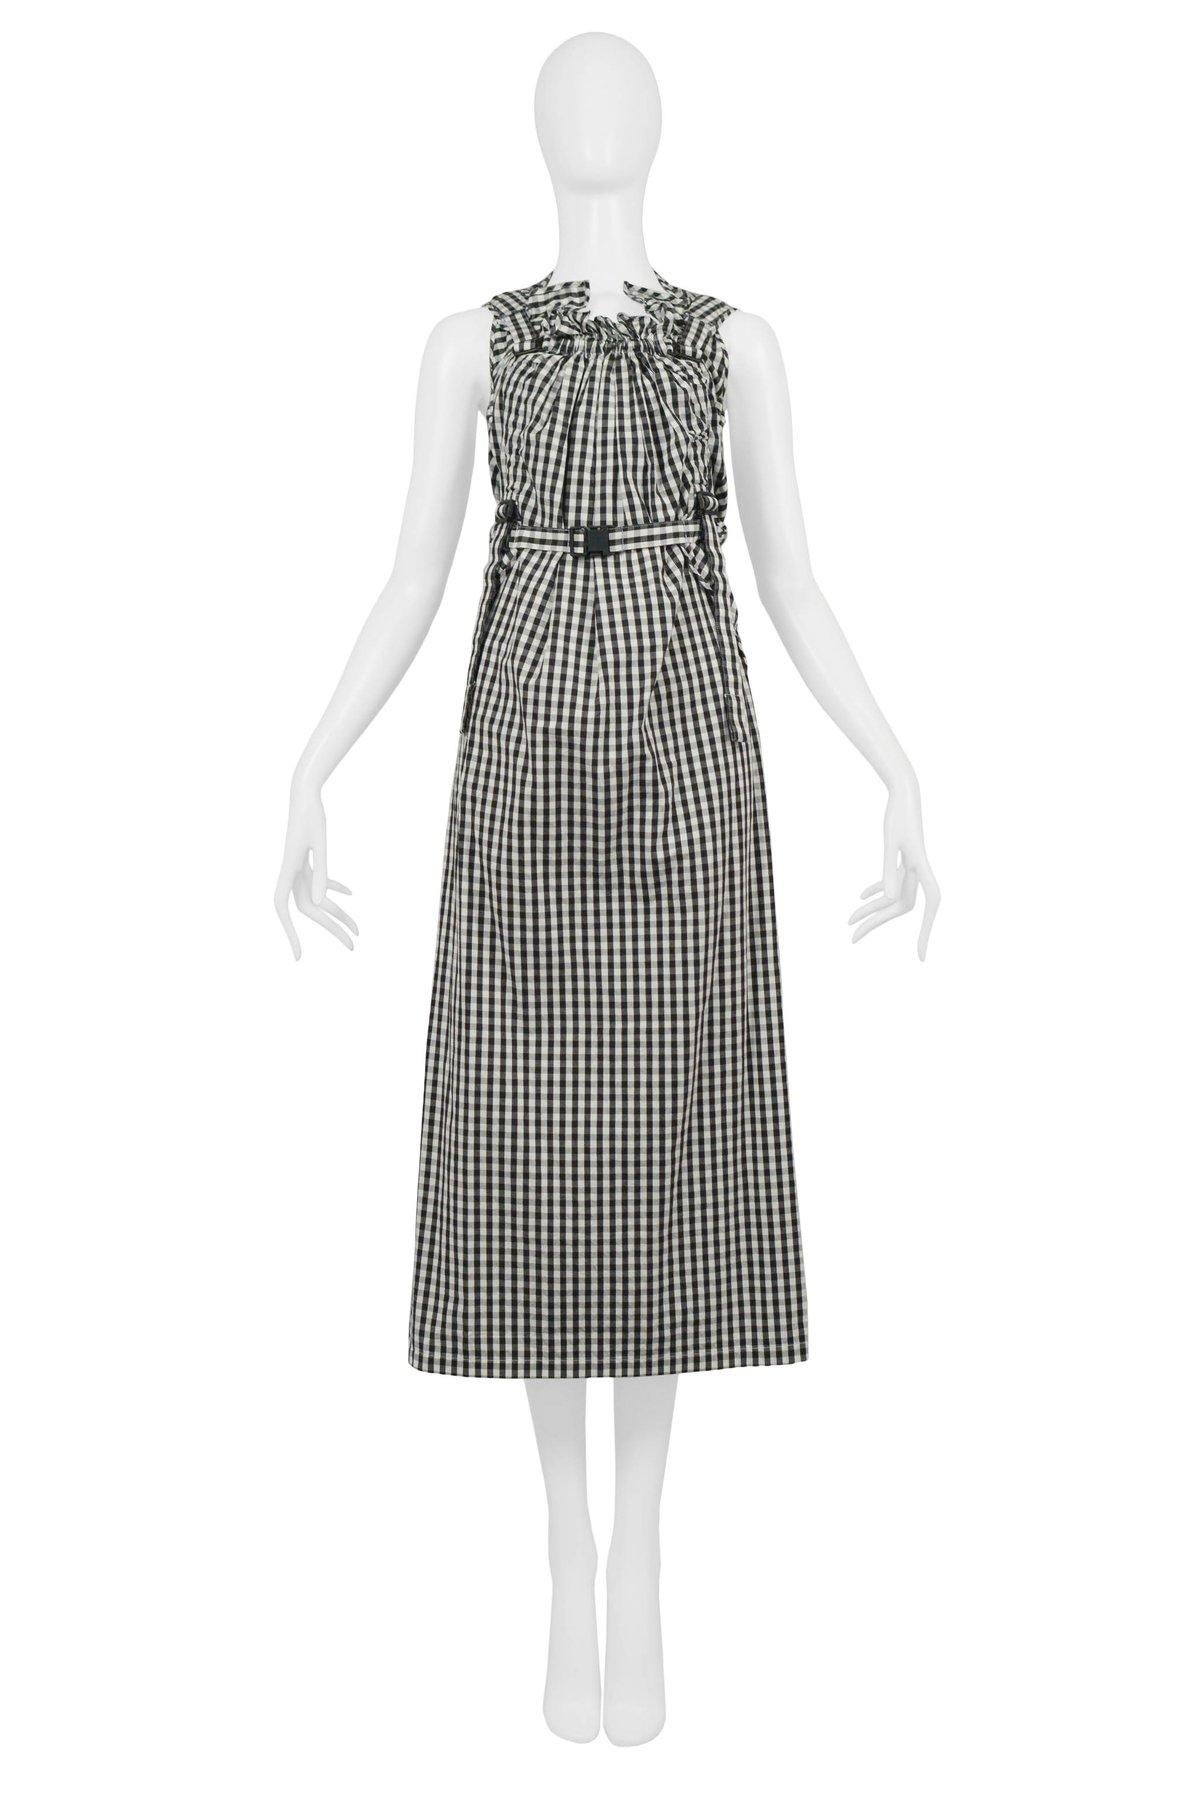 Resurrection Vintage is excited to offer a vintage Junya Watanabe for Comme des Garcons sleeveless black and white gingham check parachute dress featuring a gathered neckline with a keyhole opening in the back, multiple straps, utility buckles and